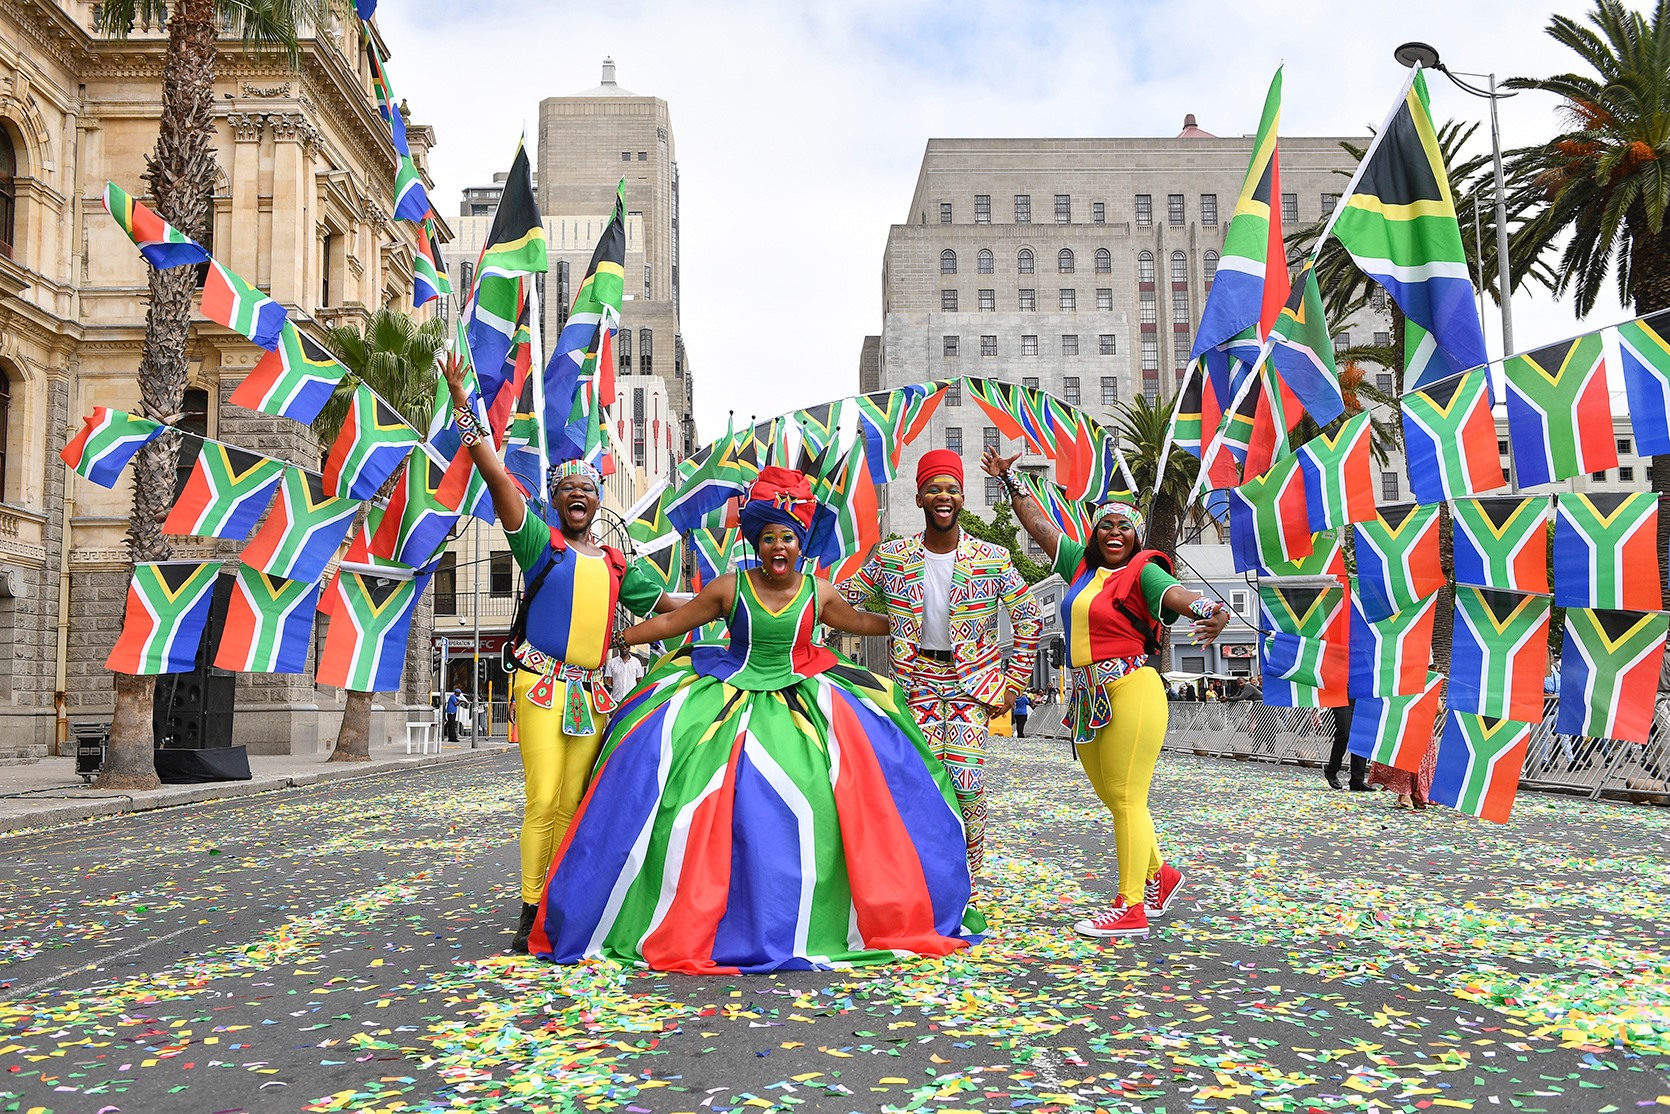 Mother City - The Cape Town Carnival is Back!!! And We Are Ready To Celebrate Together!